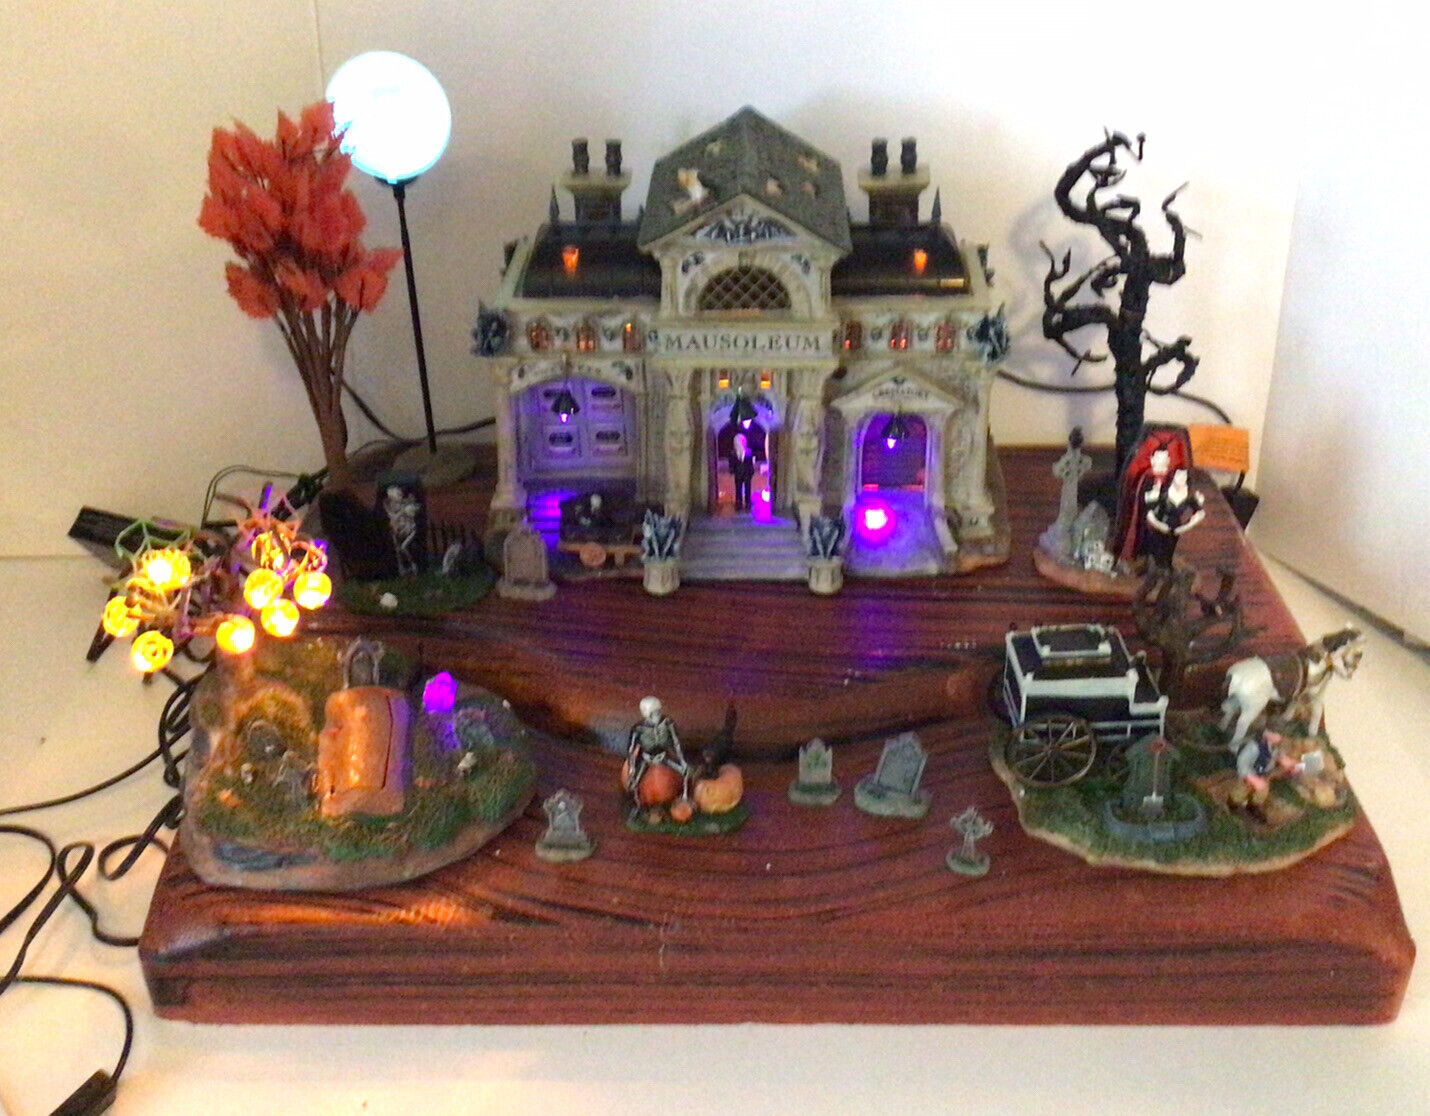 SUPER RARE LEMAX SPOOKY TOWN COLLECTION DISPLAY 14 PIECE ANIMATED MAUSOLEUM SET